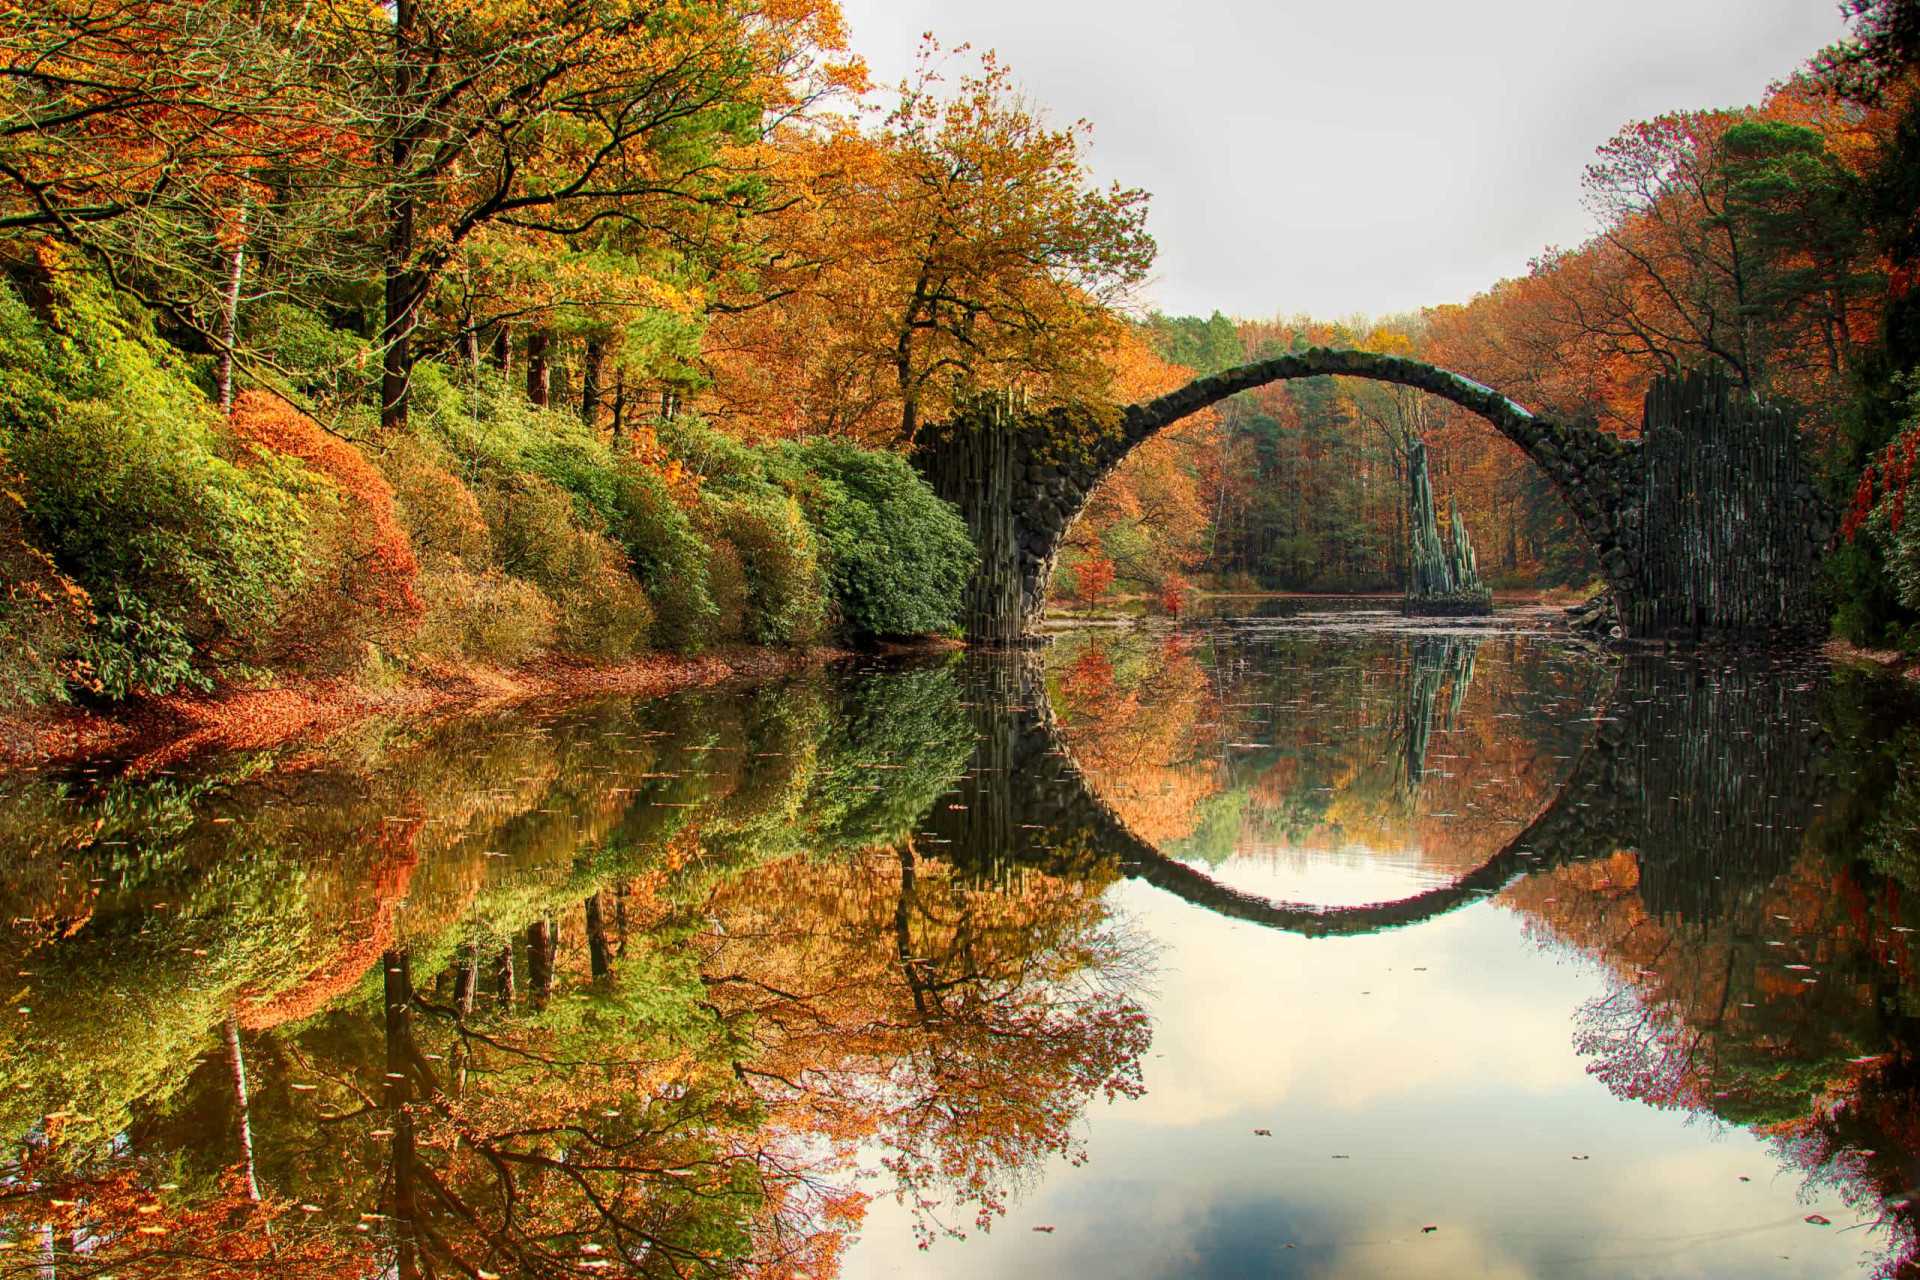 <p>The delicately arched man-made bridge known as the Rakotzbrücke spans a lake in Kromlau's Rhododendron Park. Dating back to 1860, the bridge is designed to create a perfect circle when it's reflected in still waters. It's also known as the Devil's Bridge due to the belief that the magical circle must be the hands of the devil. It's arguably the best example of its kind in the world.</p><p><a href="https://www.msn.com/en-us/community/channel/vid-7xx8mnucu55yw63we9va2gwr7uihbxwc68fxqp25x6tg4ftibpra?cvid=94631541bc0f4f89bfd59158d696ad7e">Follow us and access great exclusive content every day</a></p>